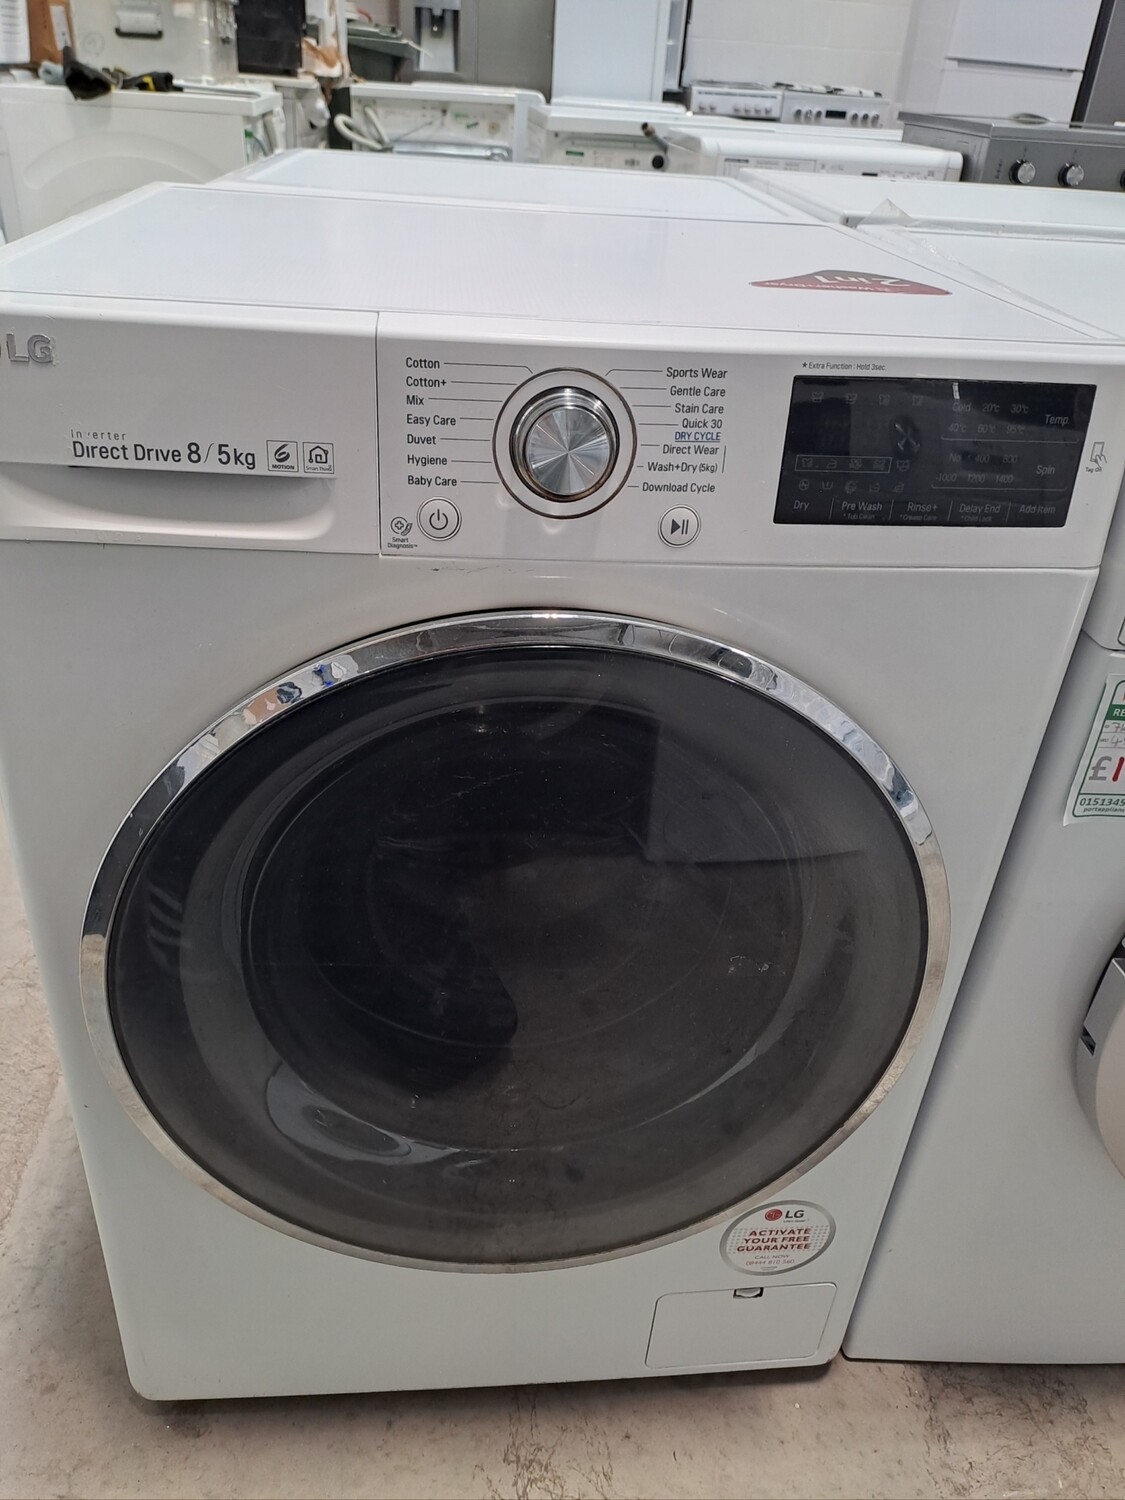 LG F4J8FH2W 8kg 1400 Spin Washer Dryer - White - Refurbished - 6 Month Guarantee. This item is located in our Whitby Road Shop 